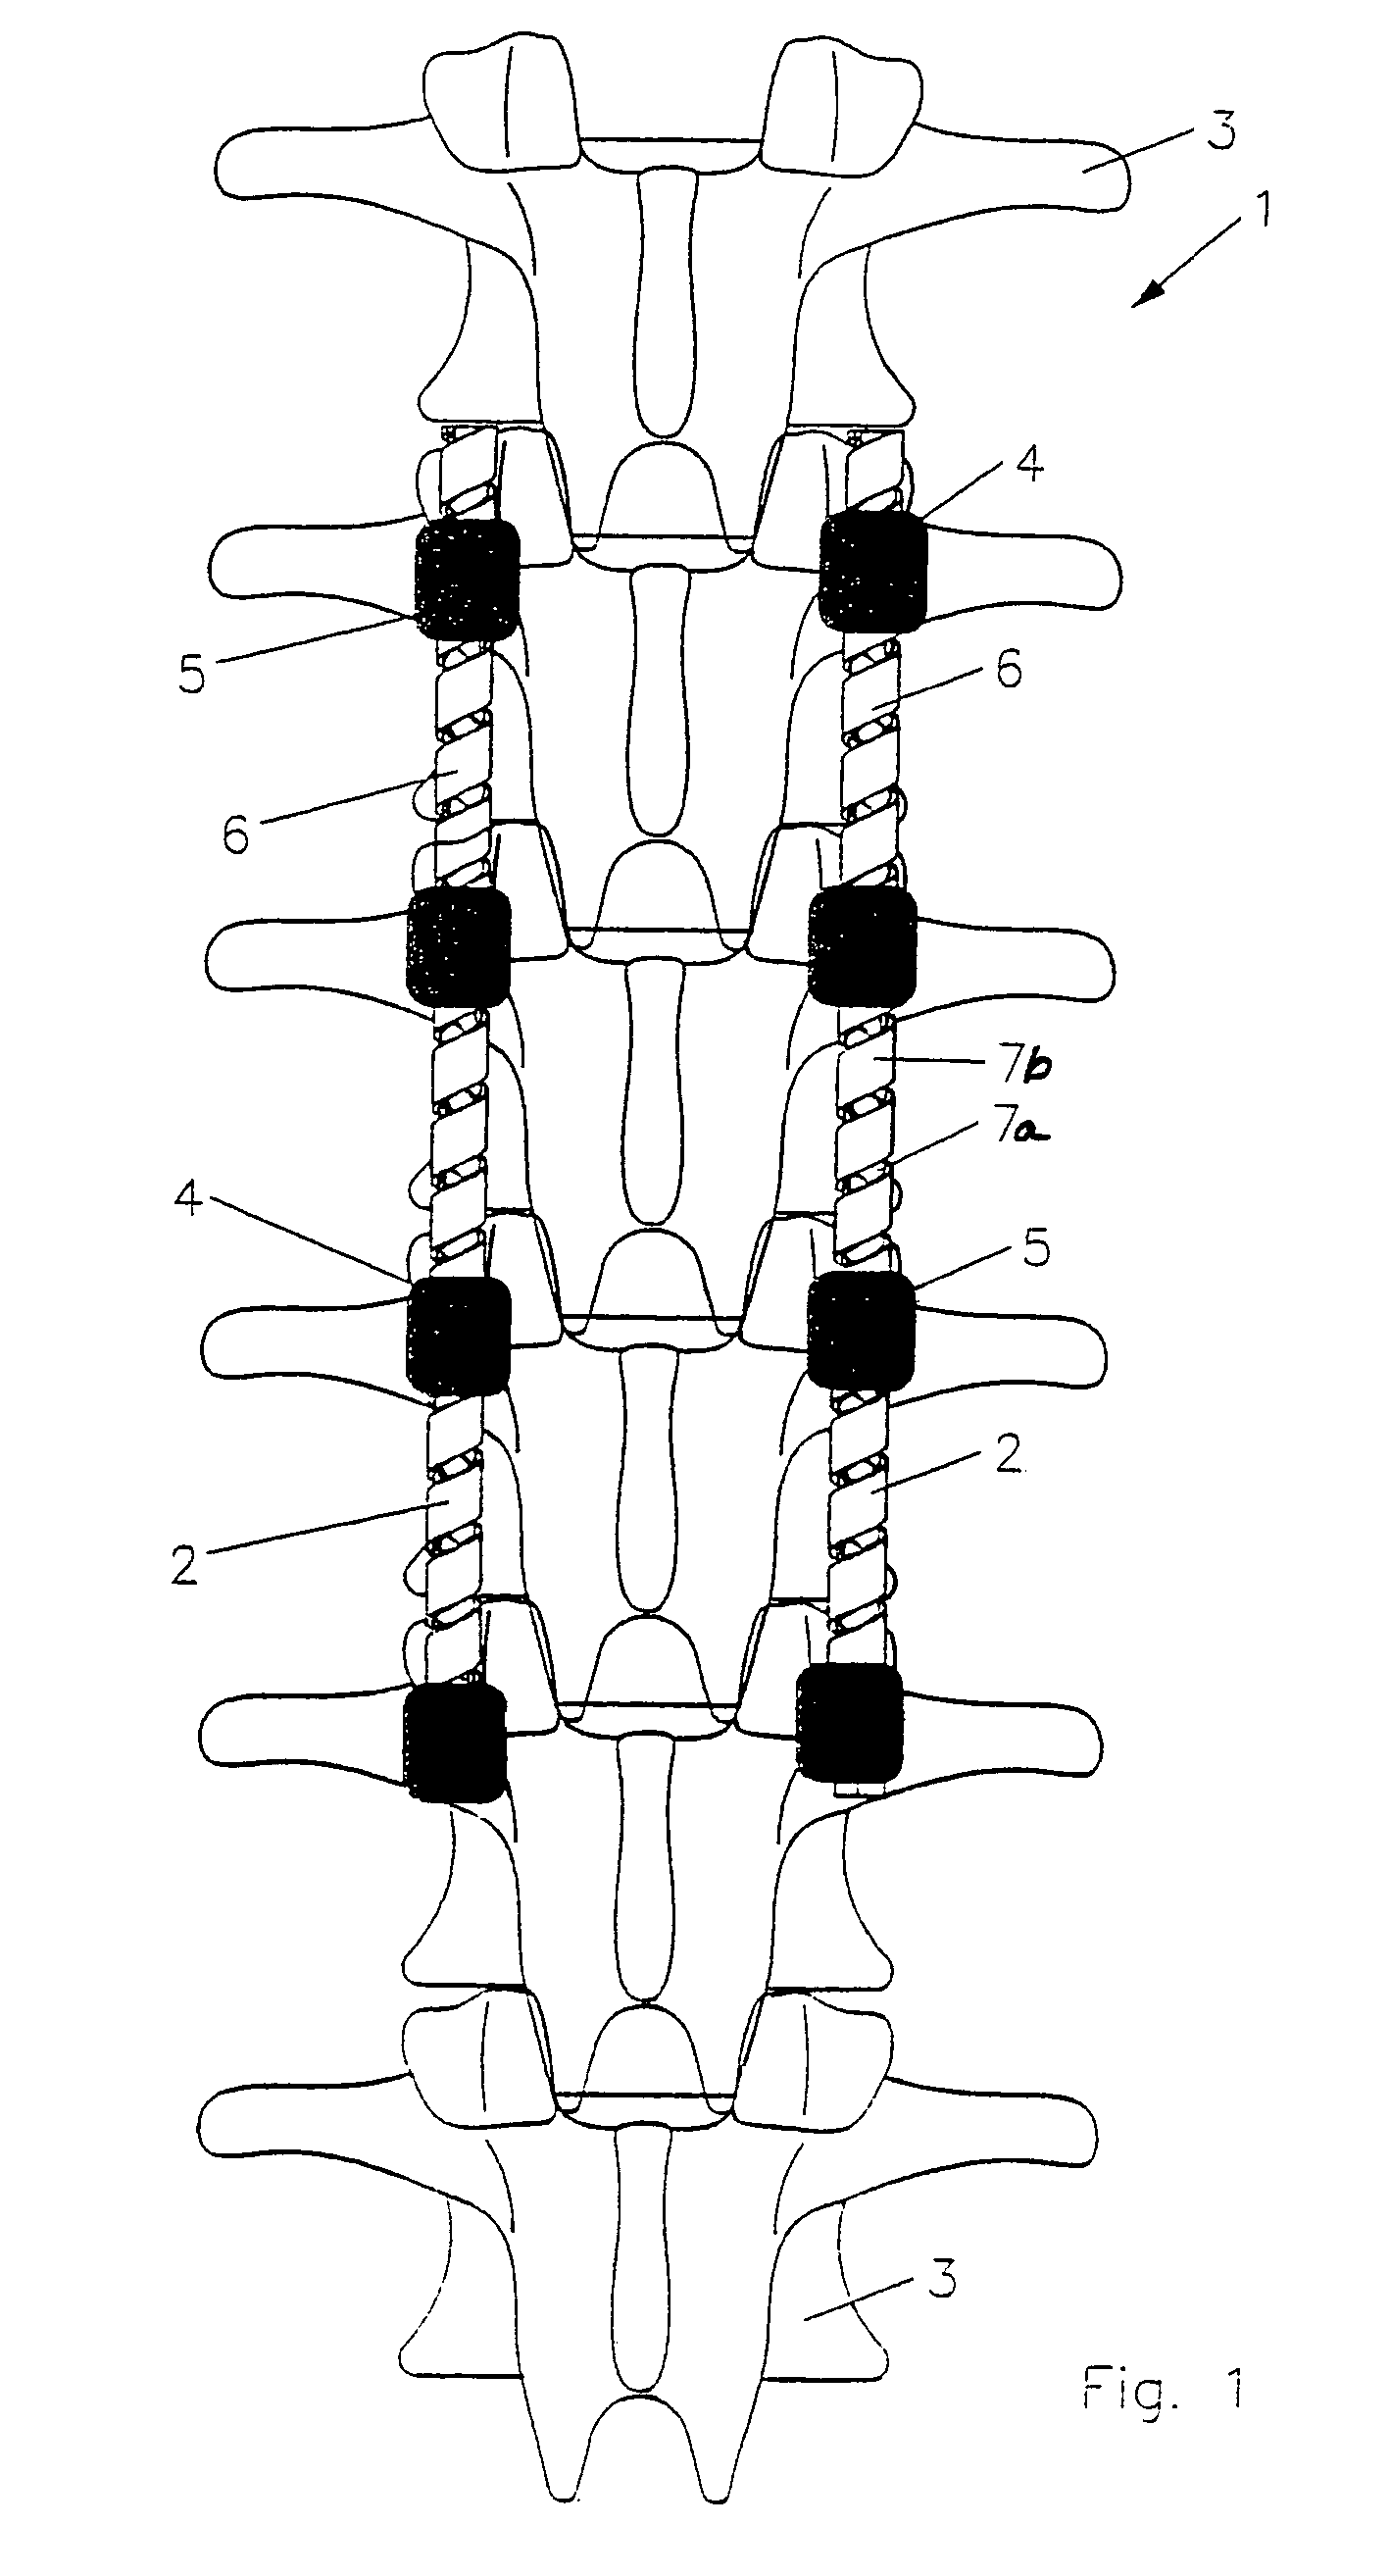 Implant for correction and stabilization of the spinal column